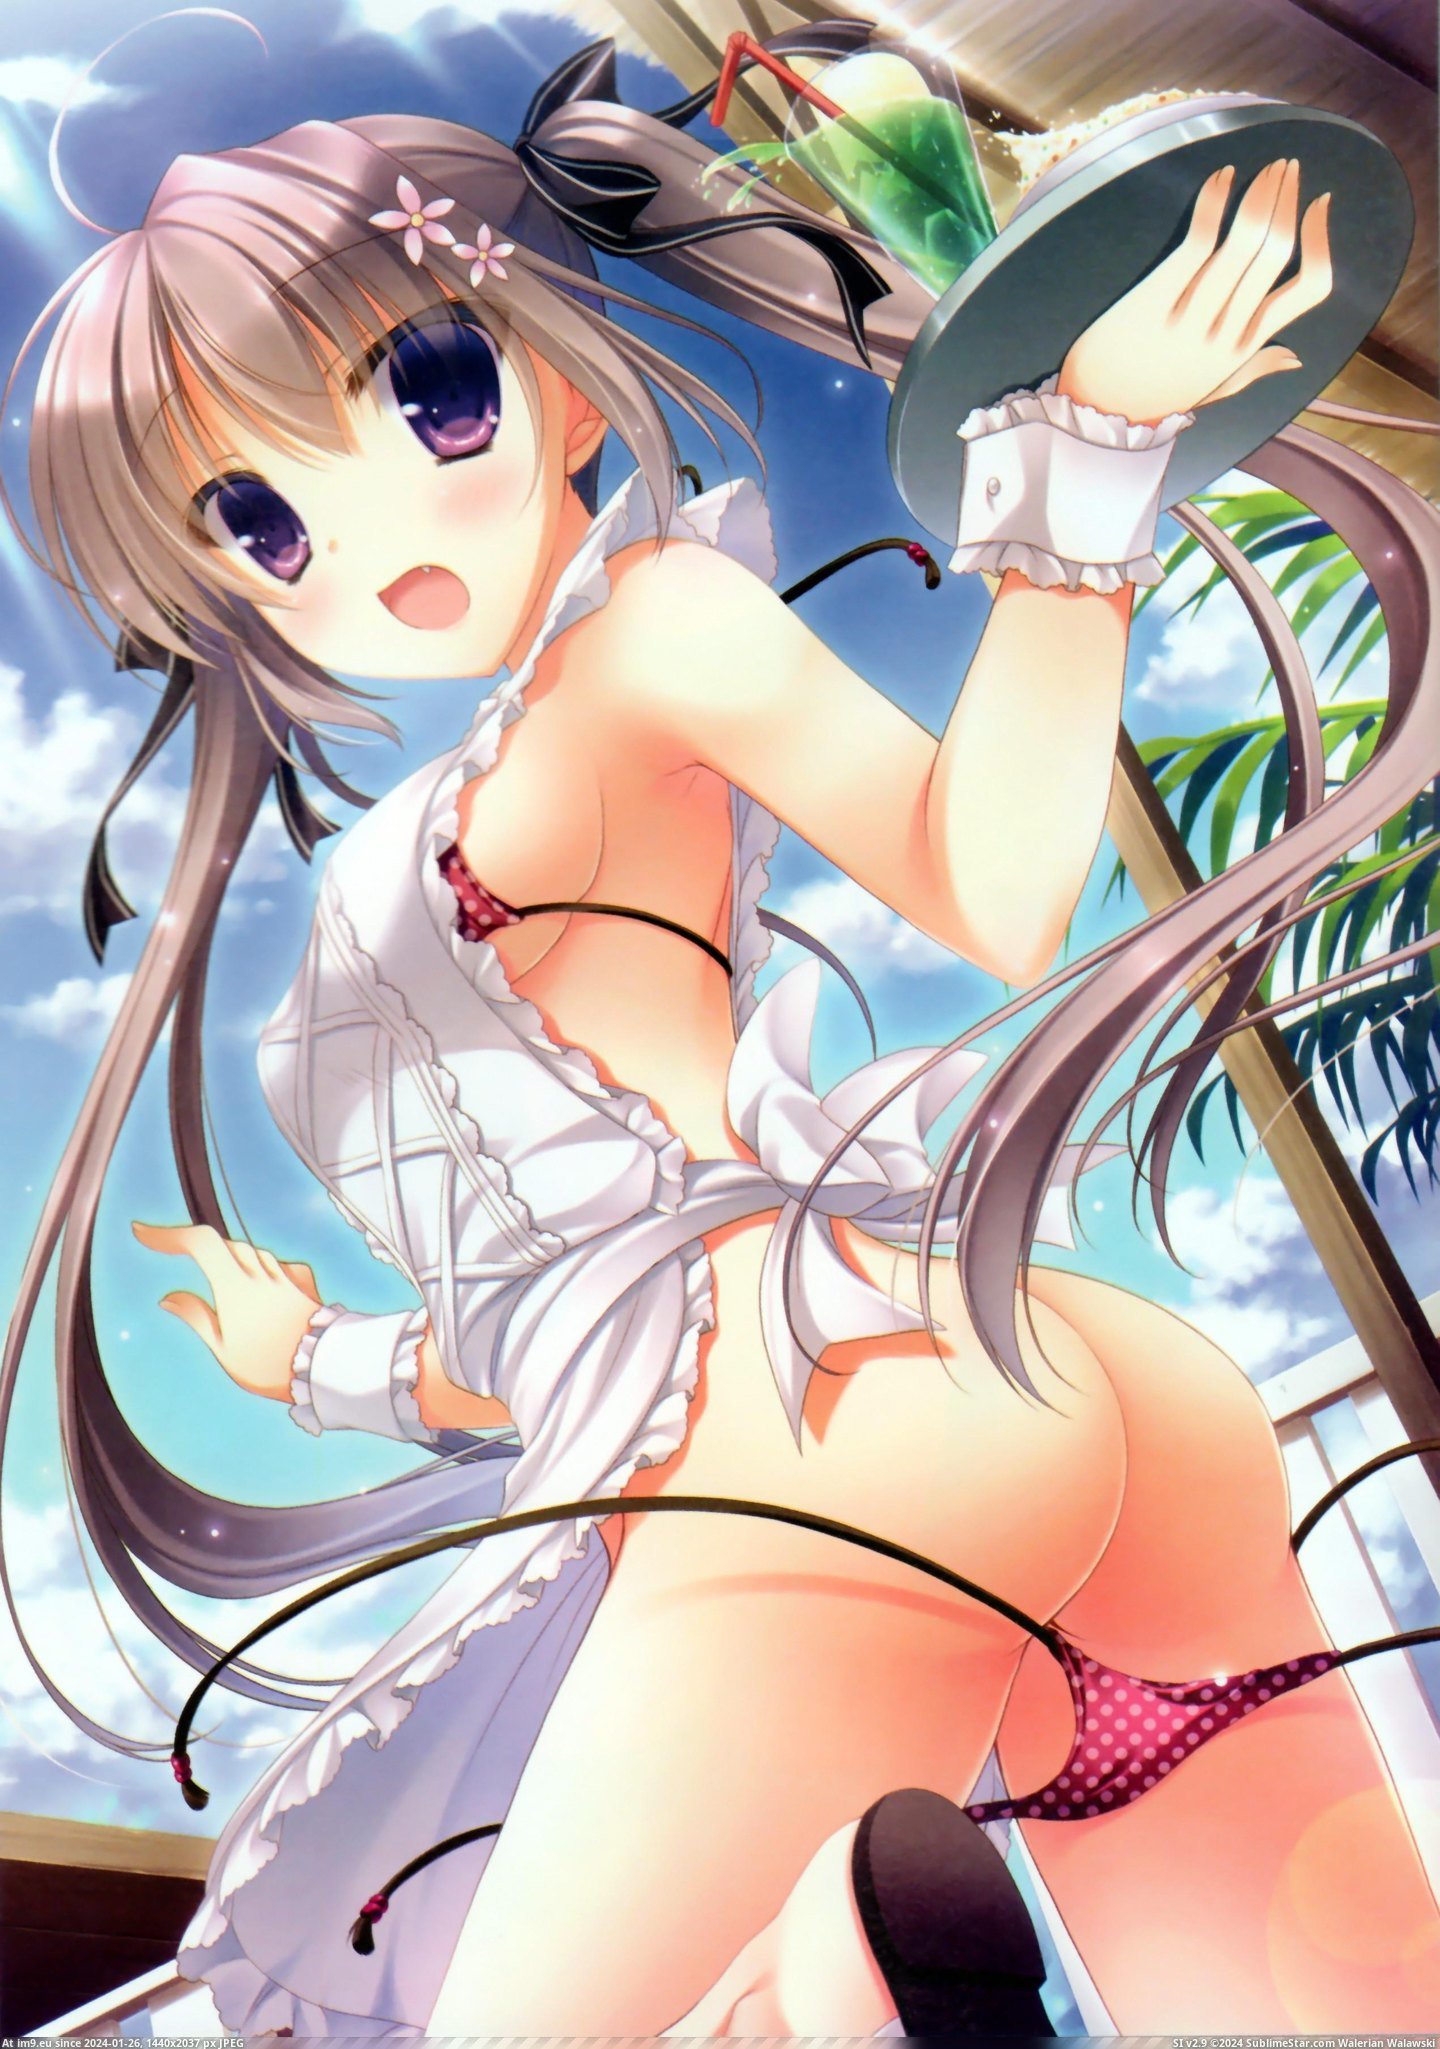 #Hentai #Album #Part #Glad #Enjoyed #Images #One [Hentai] Glad you enjoyed the first album, here comes the second one - Part 2 [250 Images] 68 Pic. (Image of album My r/HENTAI favs))